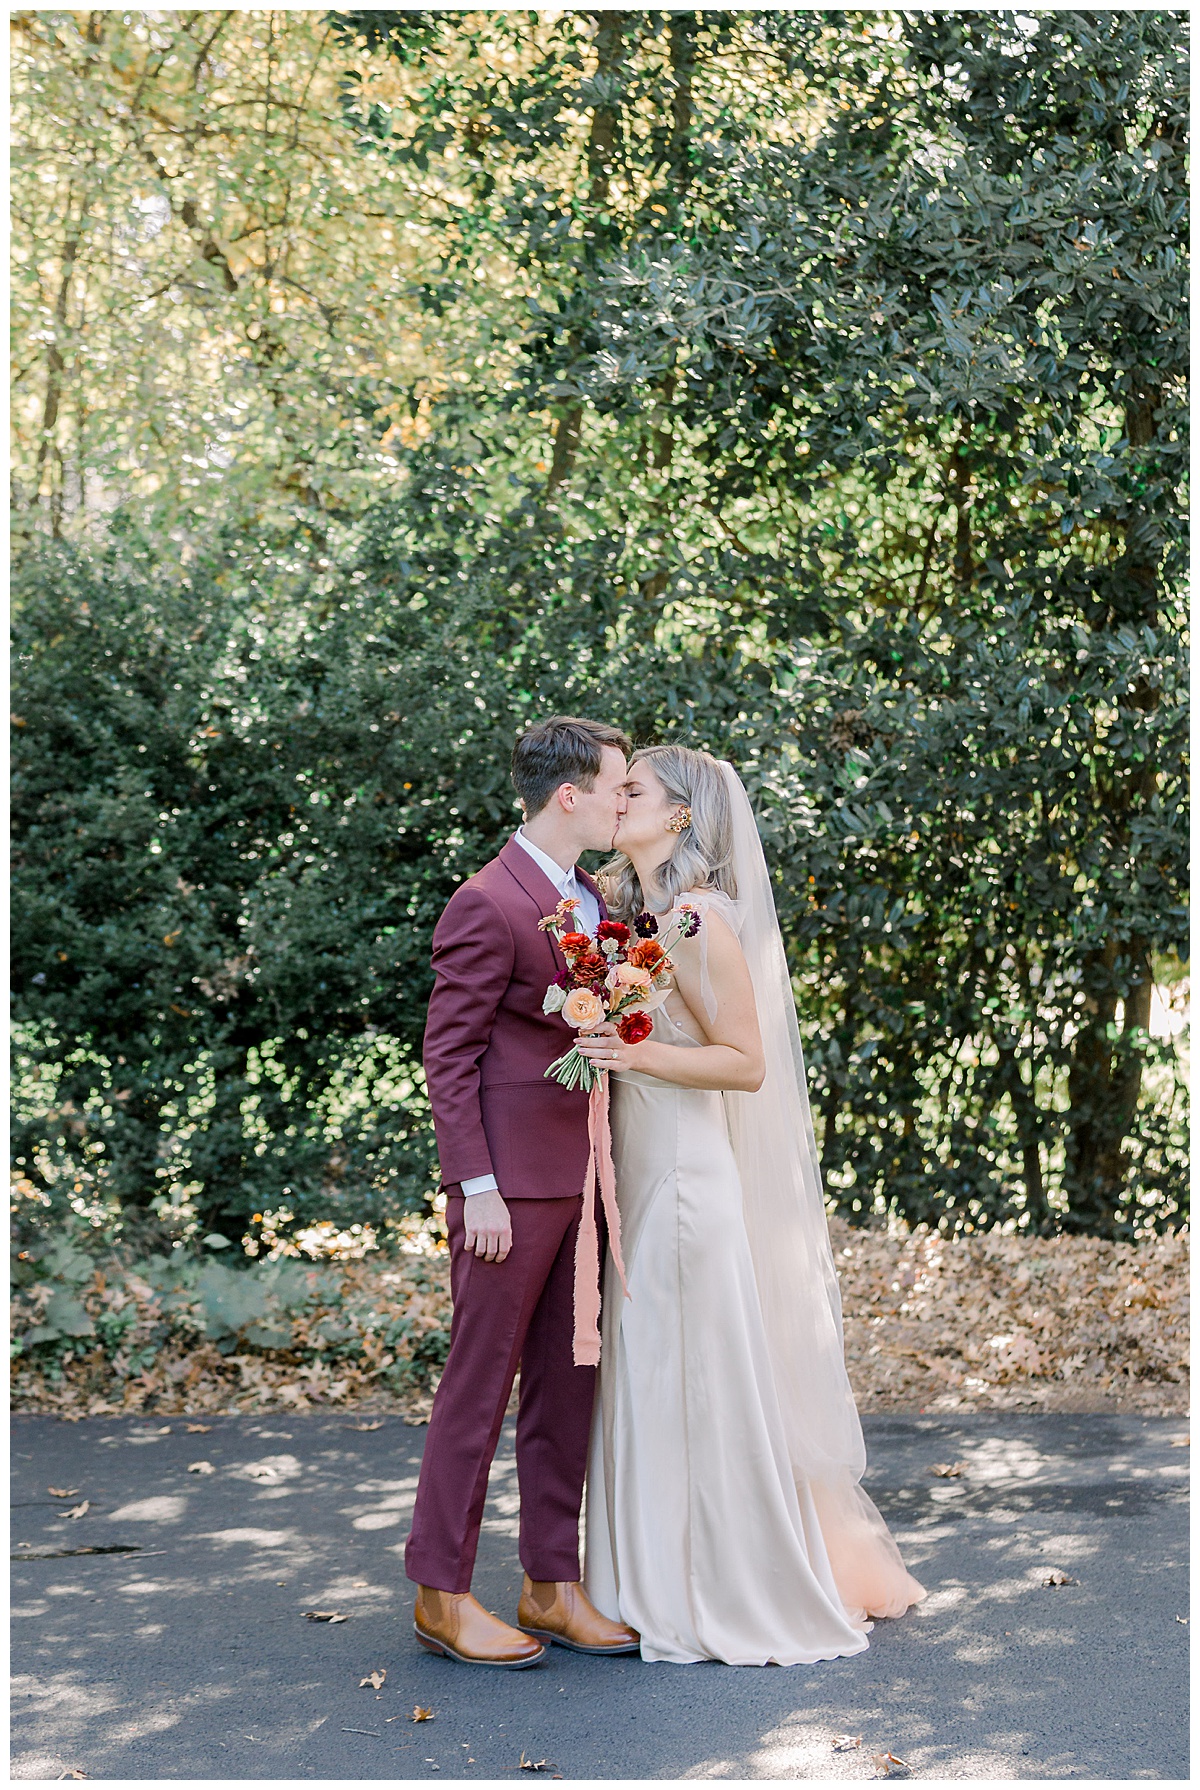 Margot and Johnny - A Charleston Covid Elopement | Candice Adelle Photography - Charleston Elopement Photographer_0043.jpg